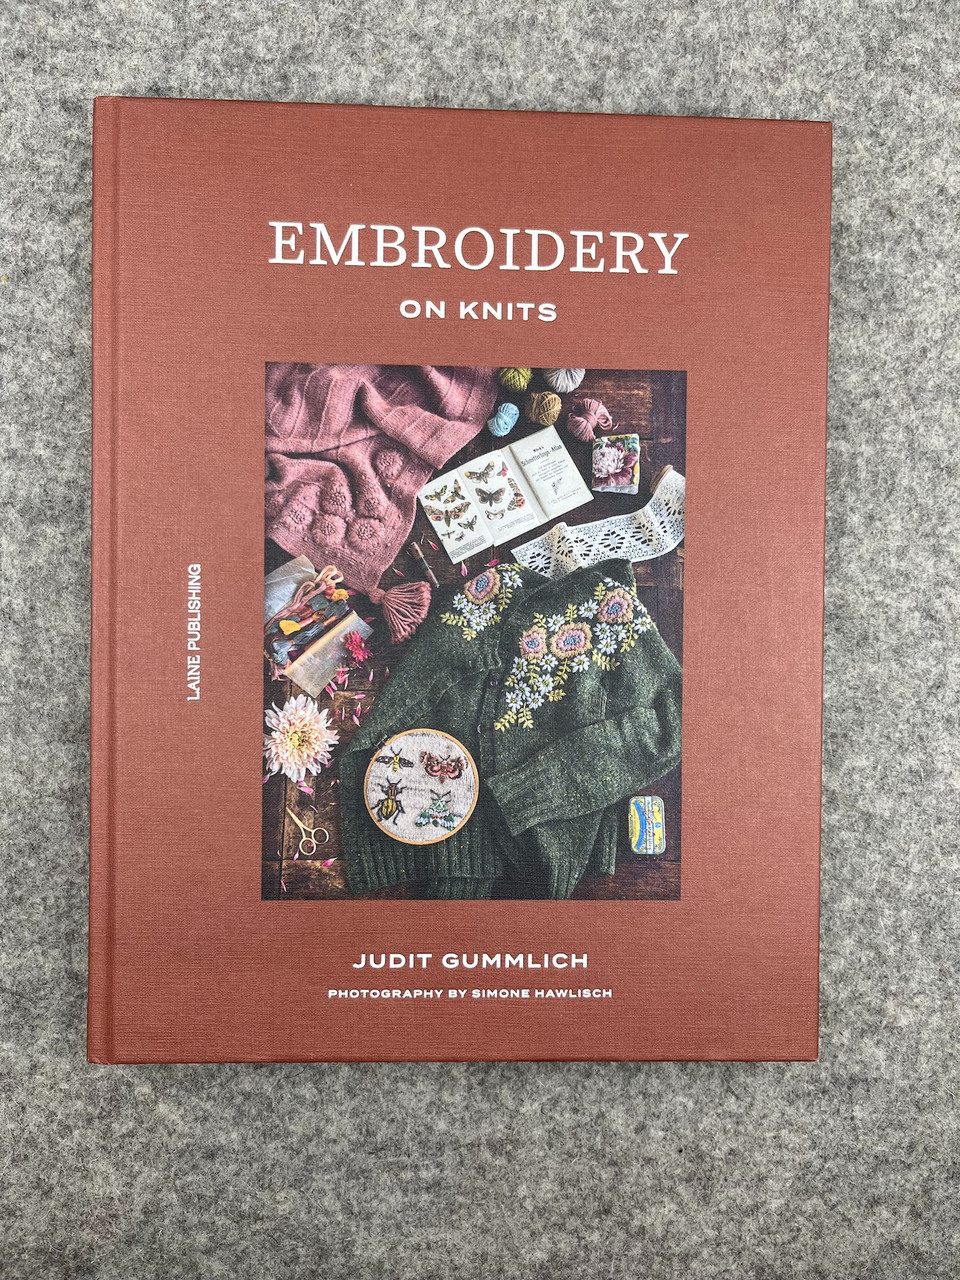 Embroidery on Knits book at The Endless Skein